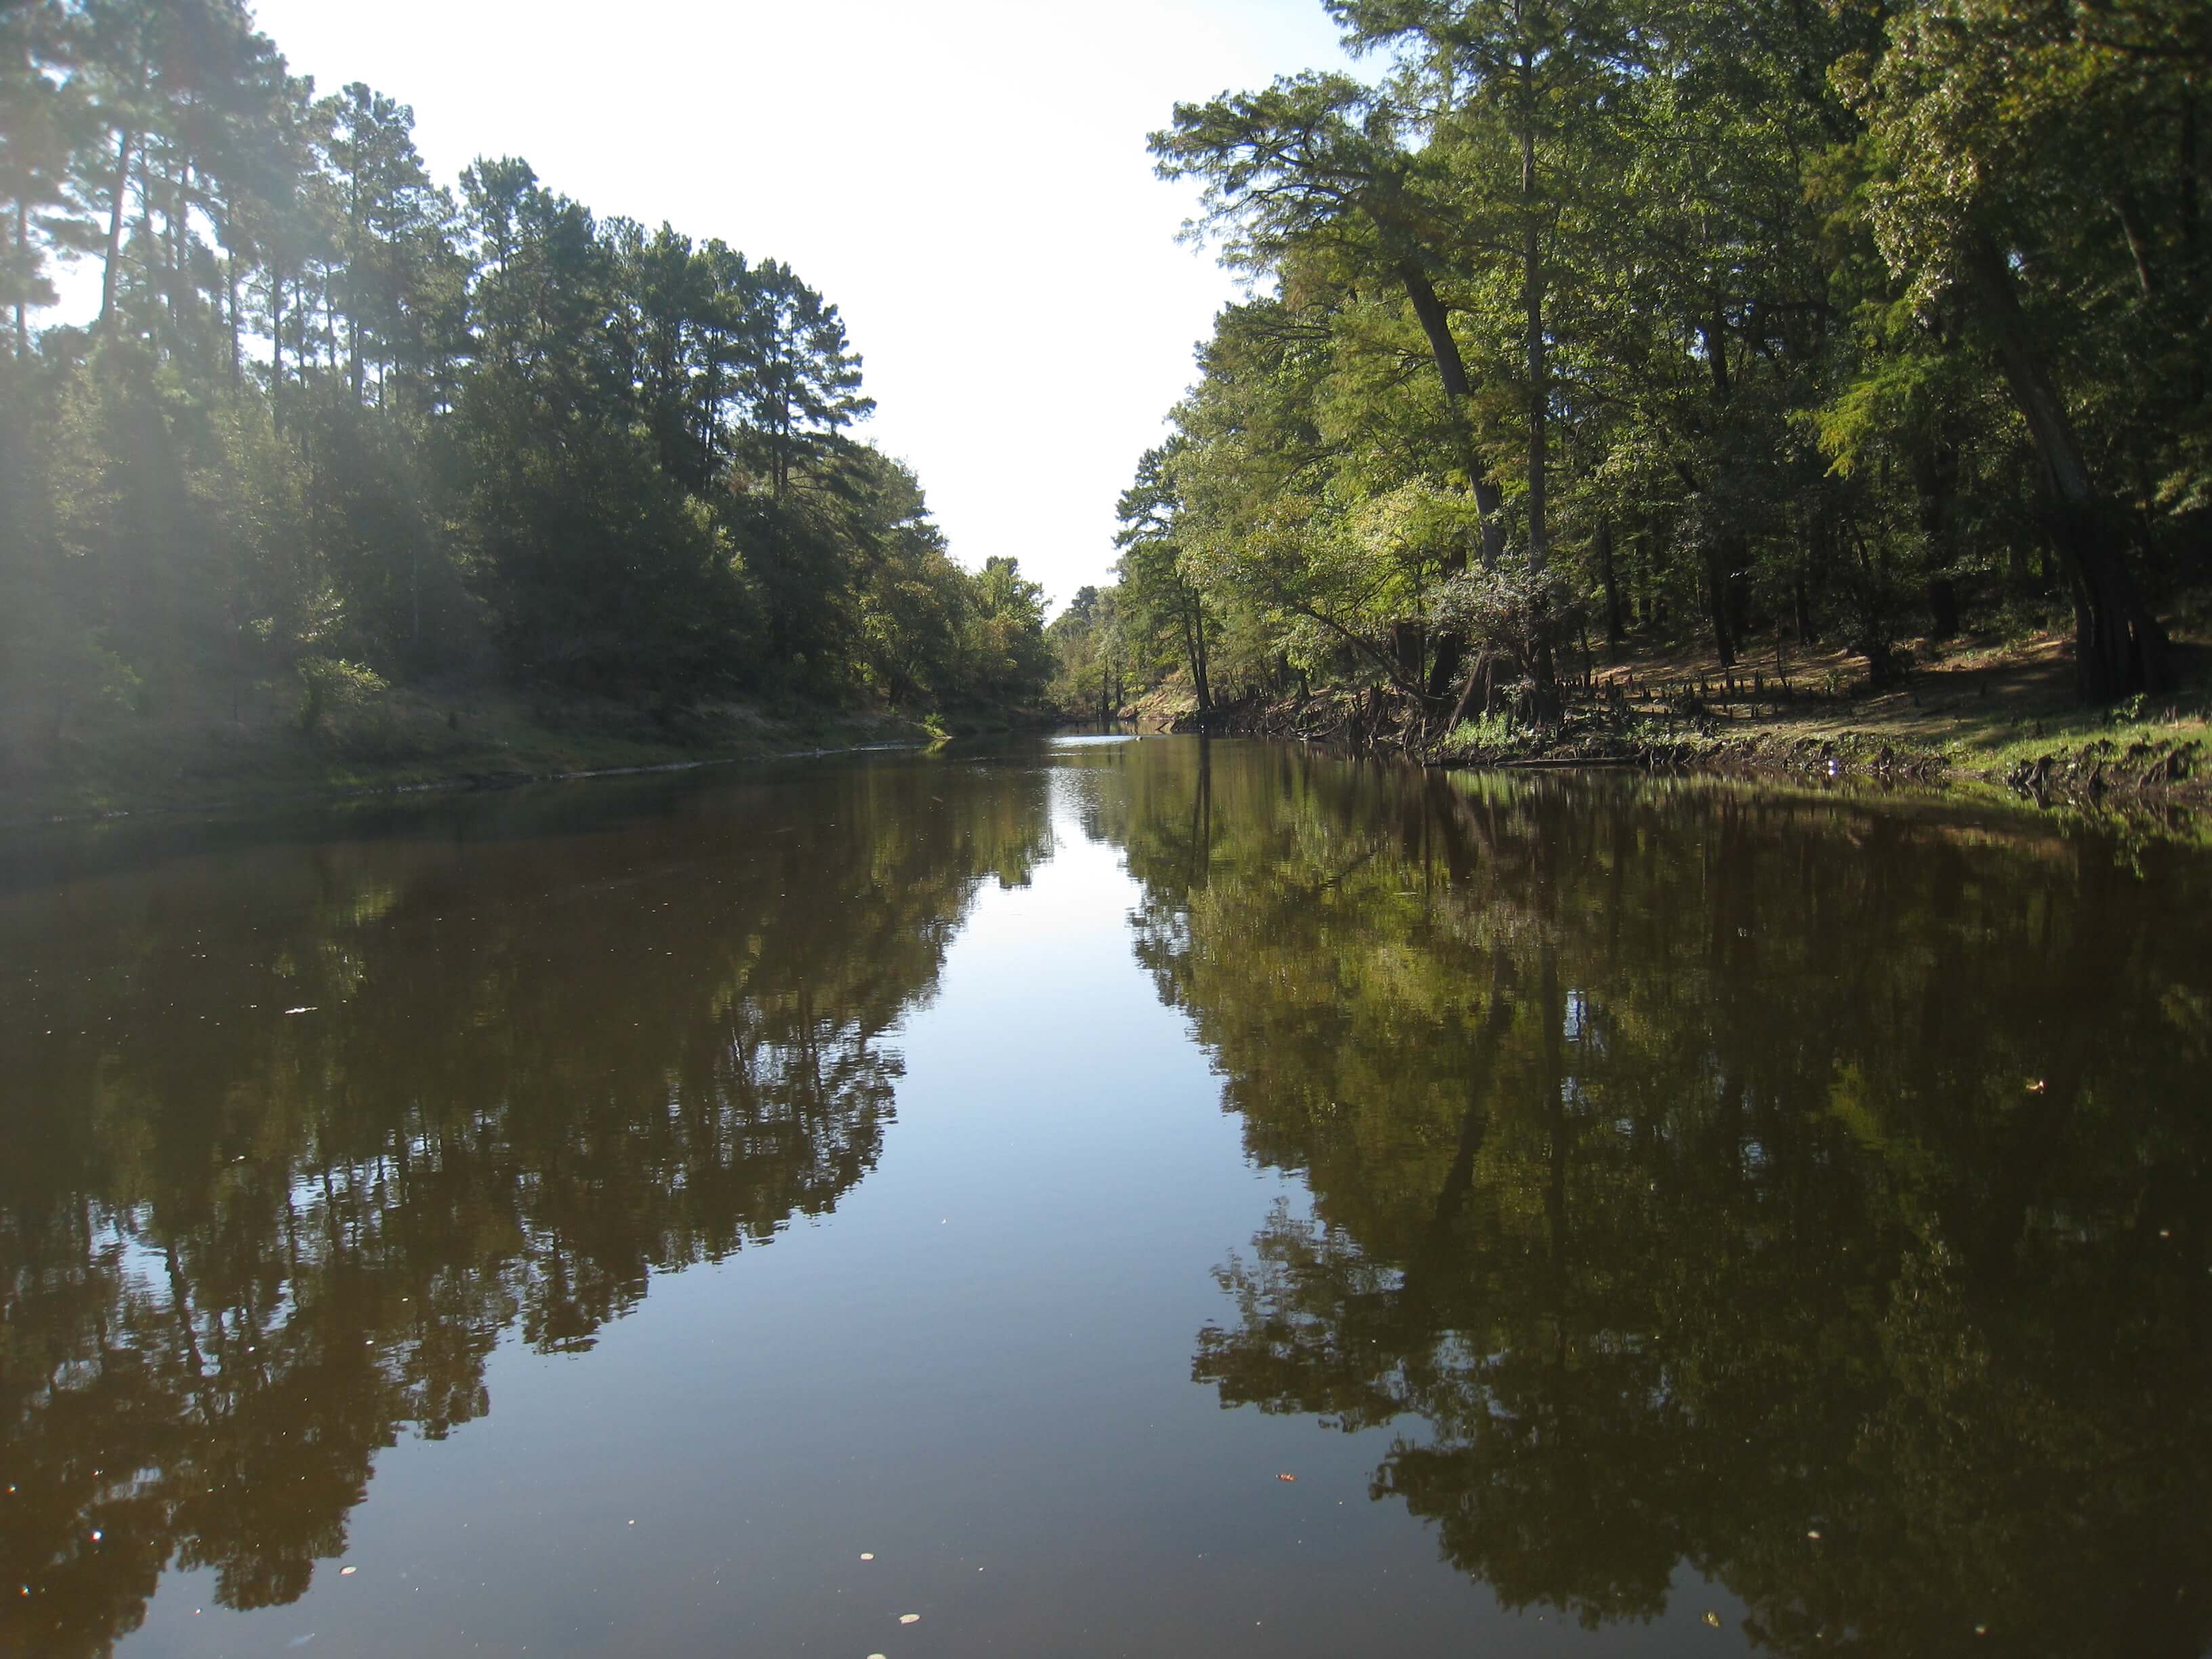 A calm day on Big Cypress Bayou just below Ferrell’s Bridge Dam and Lake O’ the Pines Reservoir.